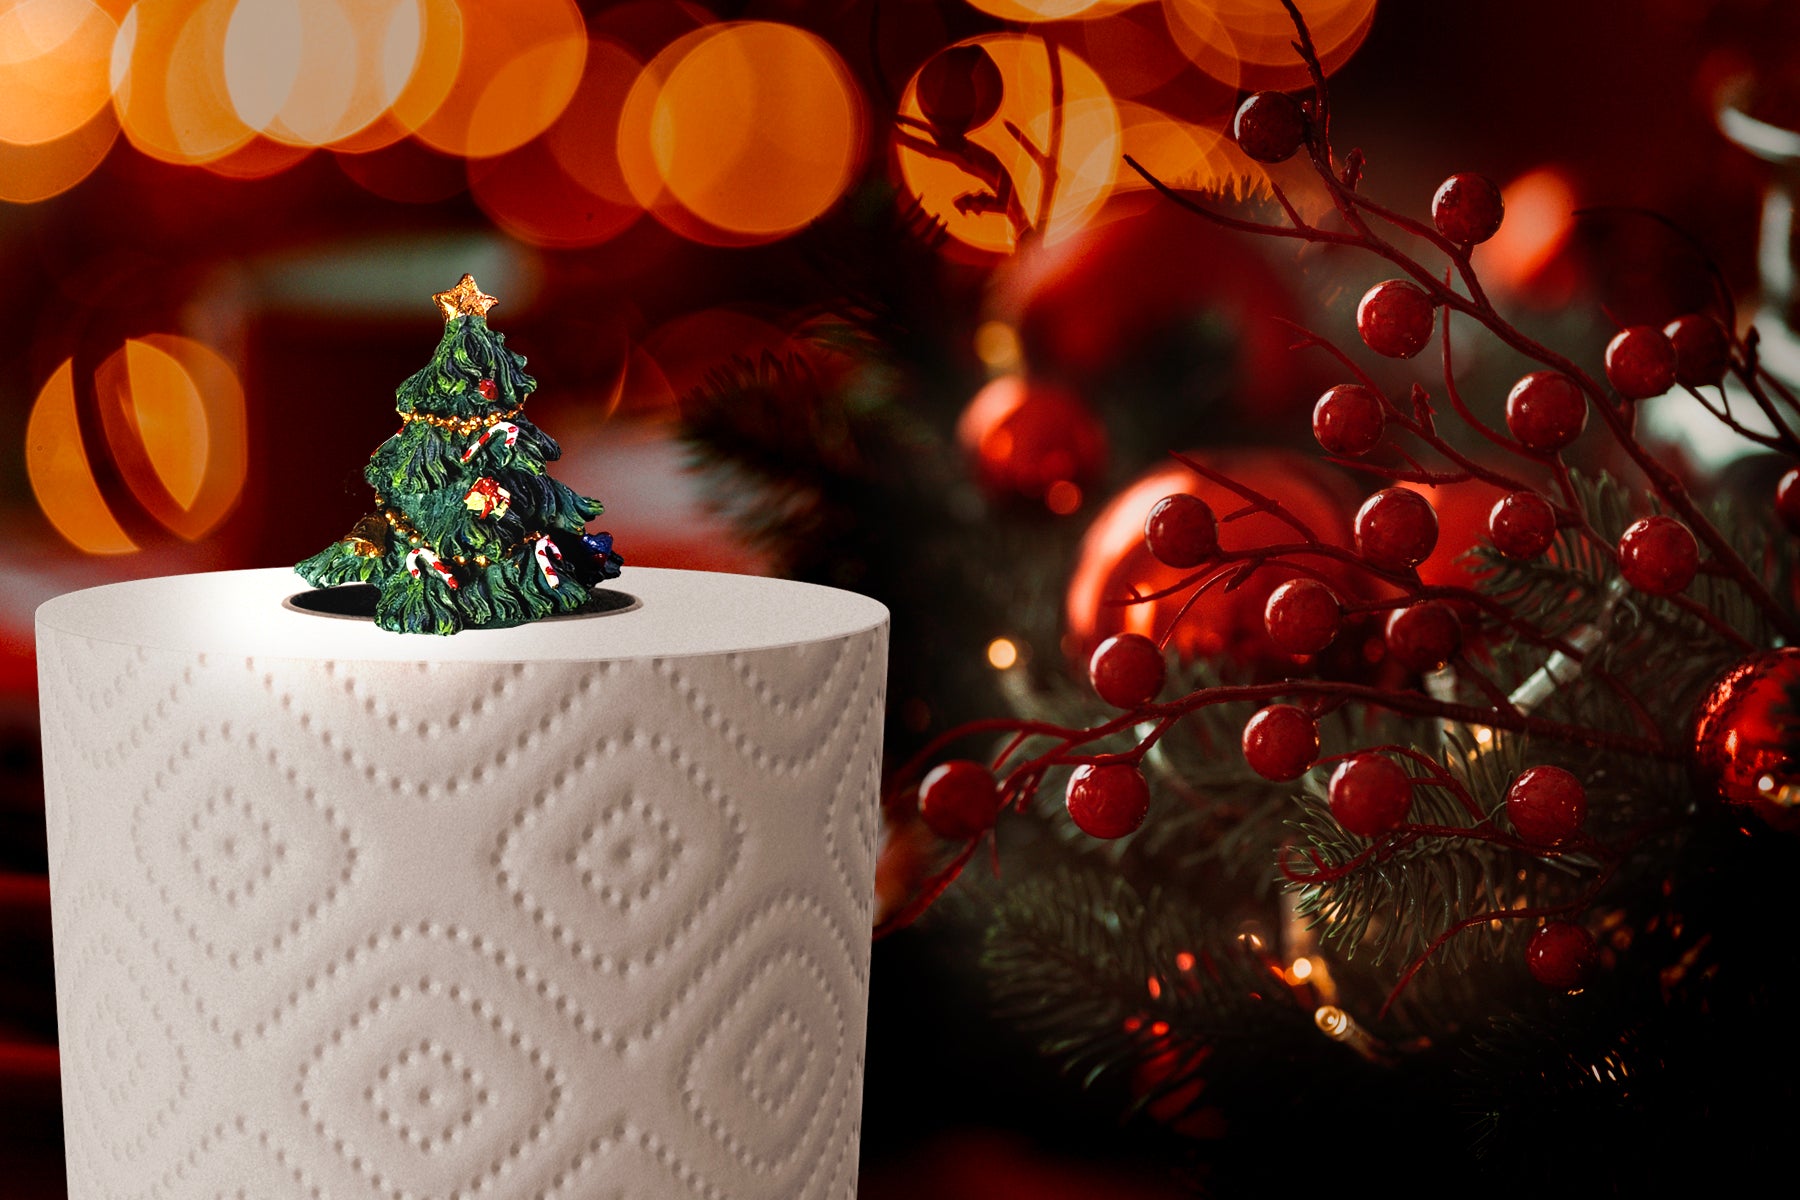 Toppers Paper Towel Holder With Interchangeable Tops for All Holidays